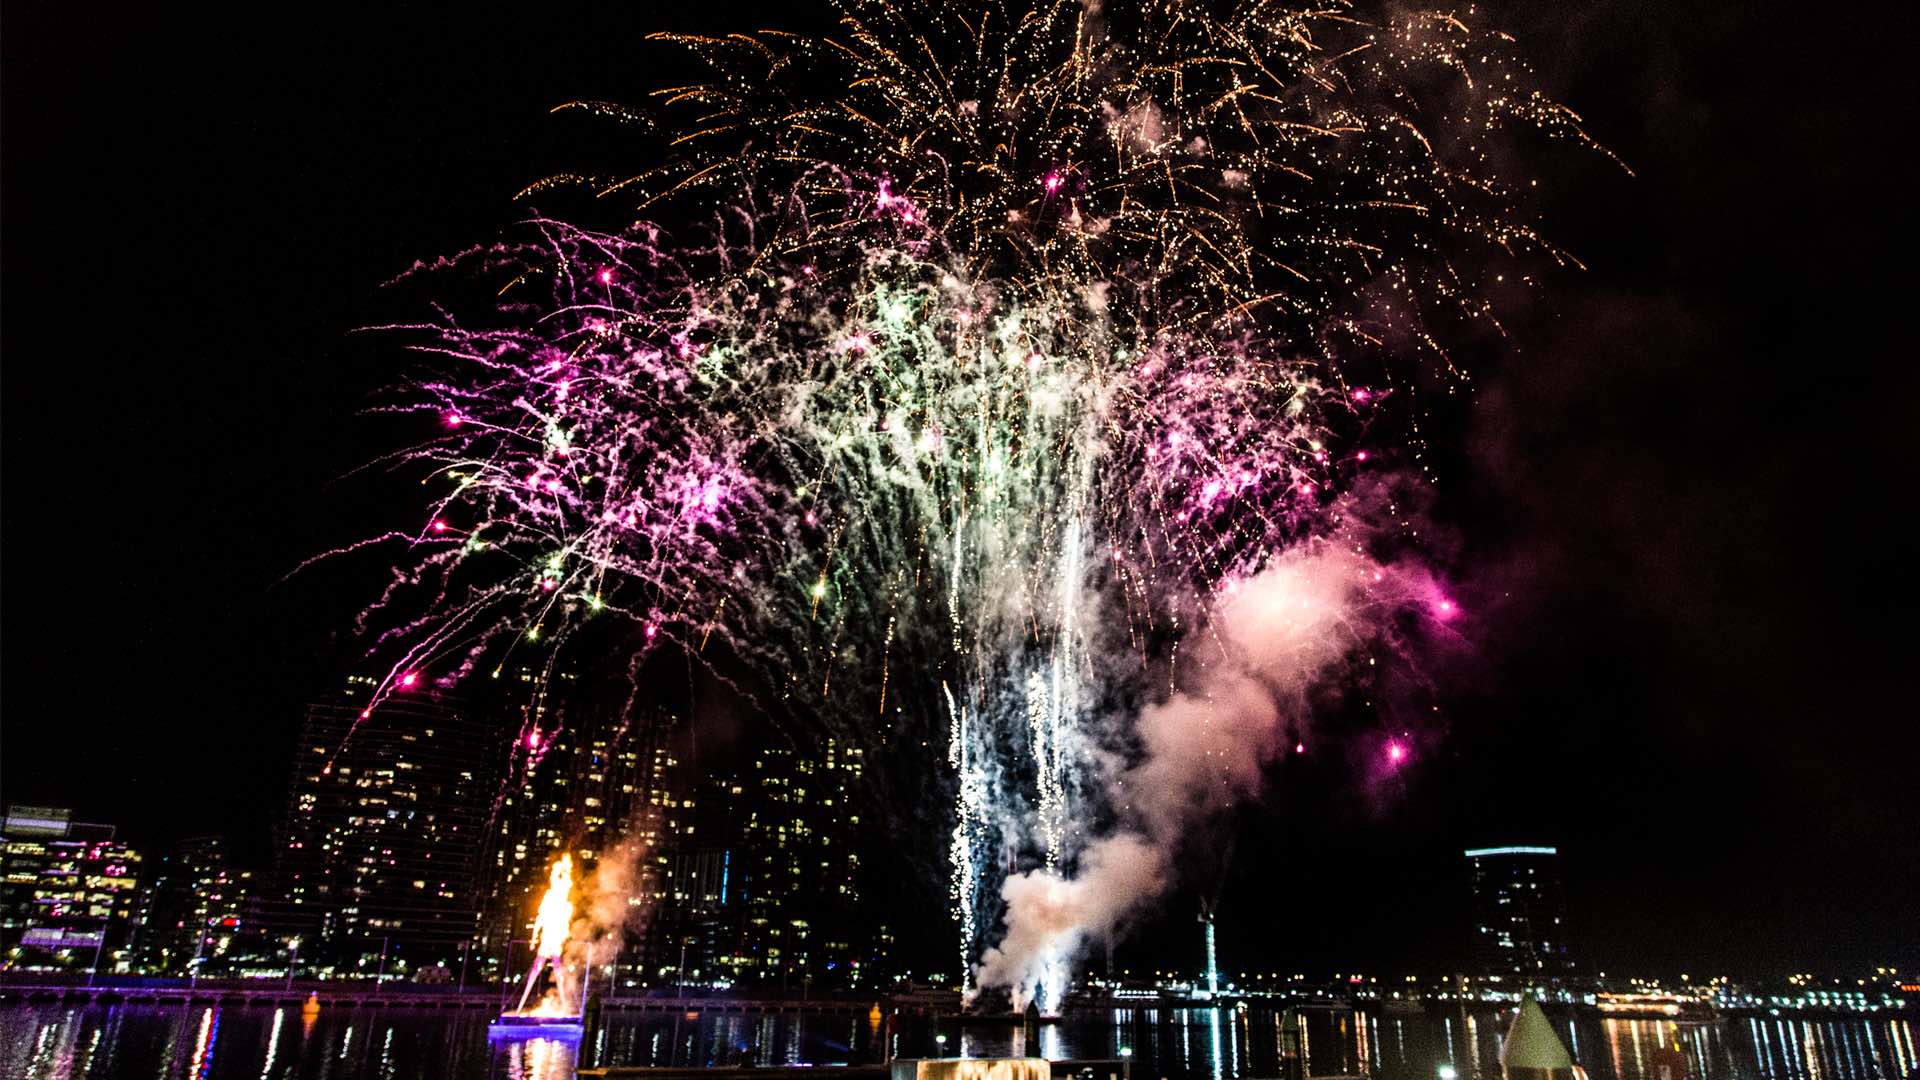 The Docklands Firelight Festival Is Set To Heat Up Your Winter With Its 2018 Program